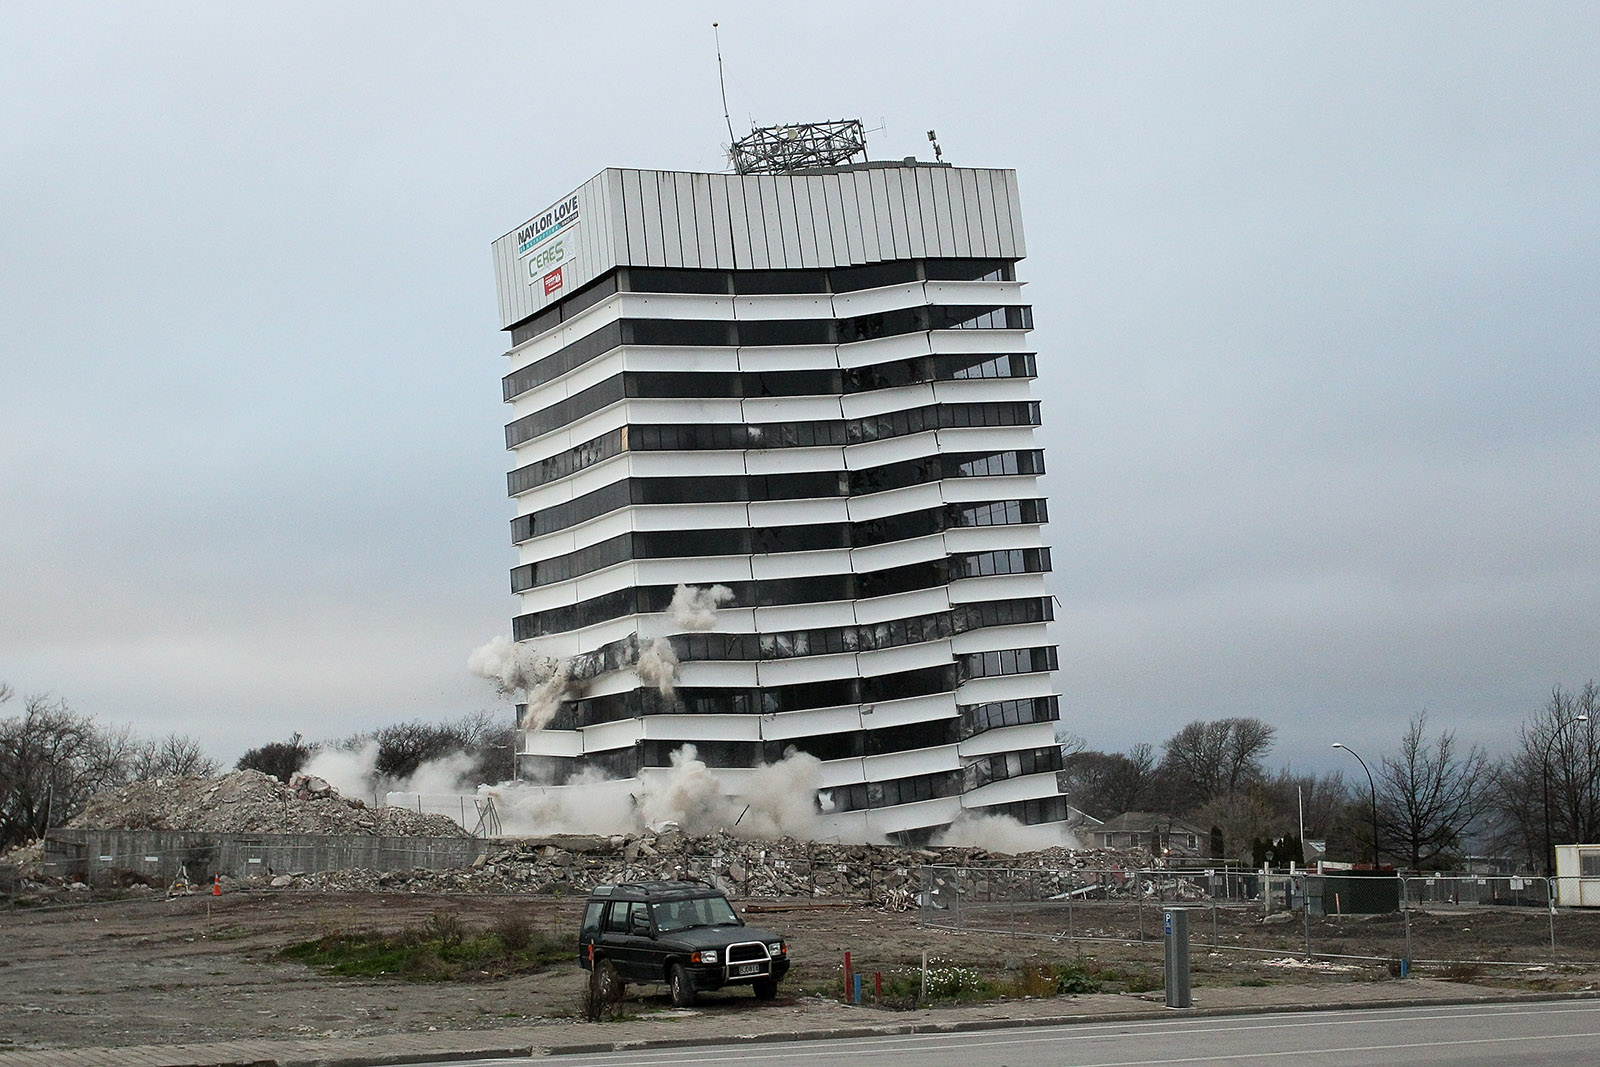 An earthquake-damaged building is demolished by controlled explosions, Christchurch, New Zealand, August 5, 2012